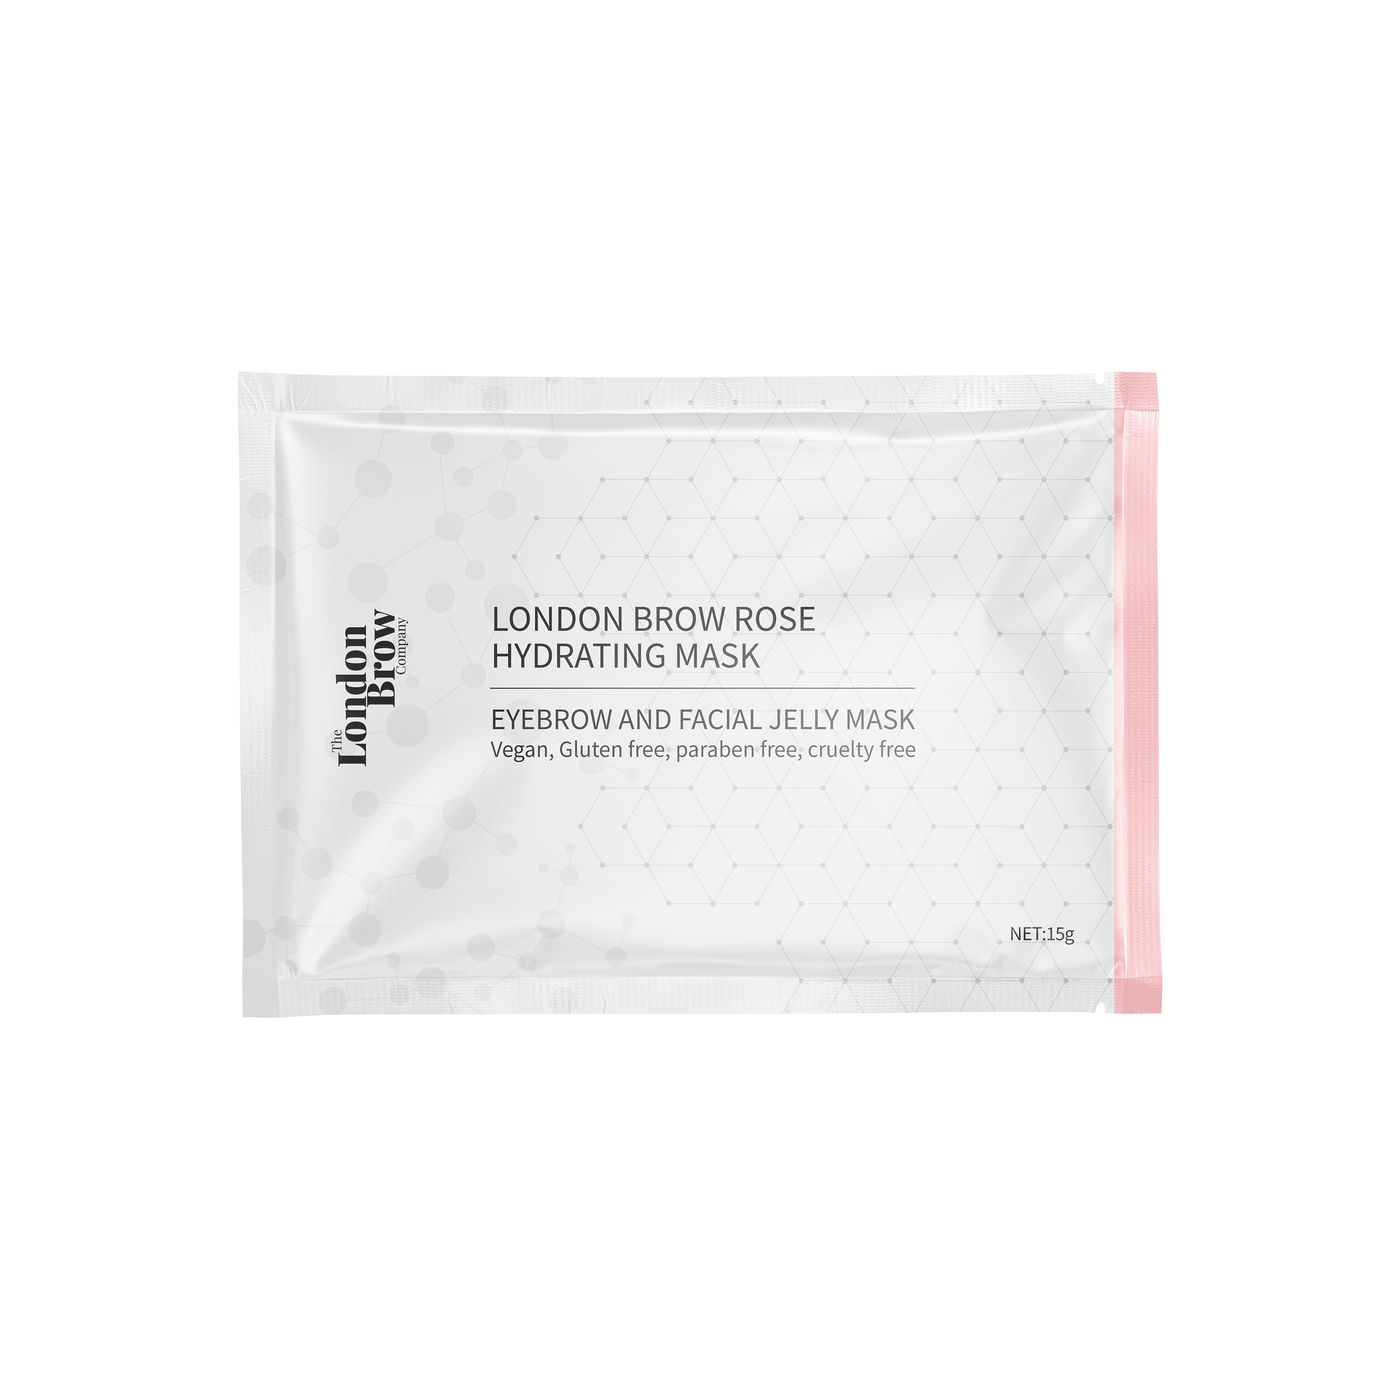 Hydrating Brow and Face Hydro Jelly Mask - Egyptian Rose - The London Brow Company